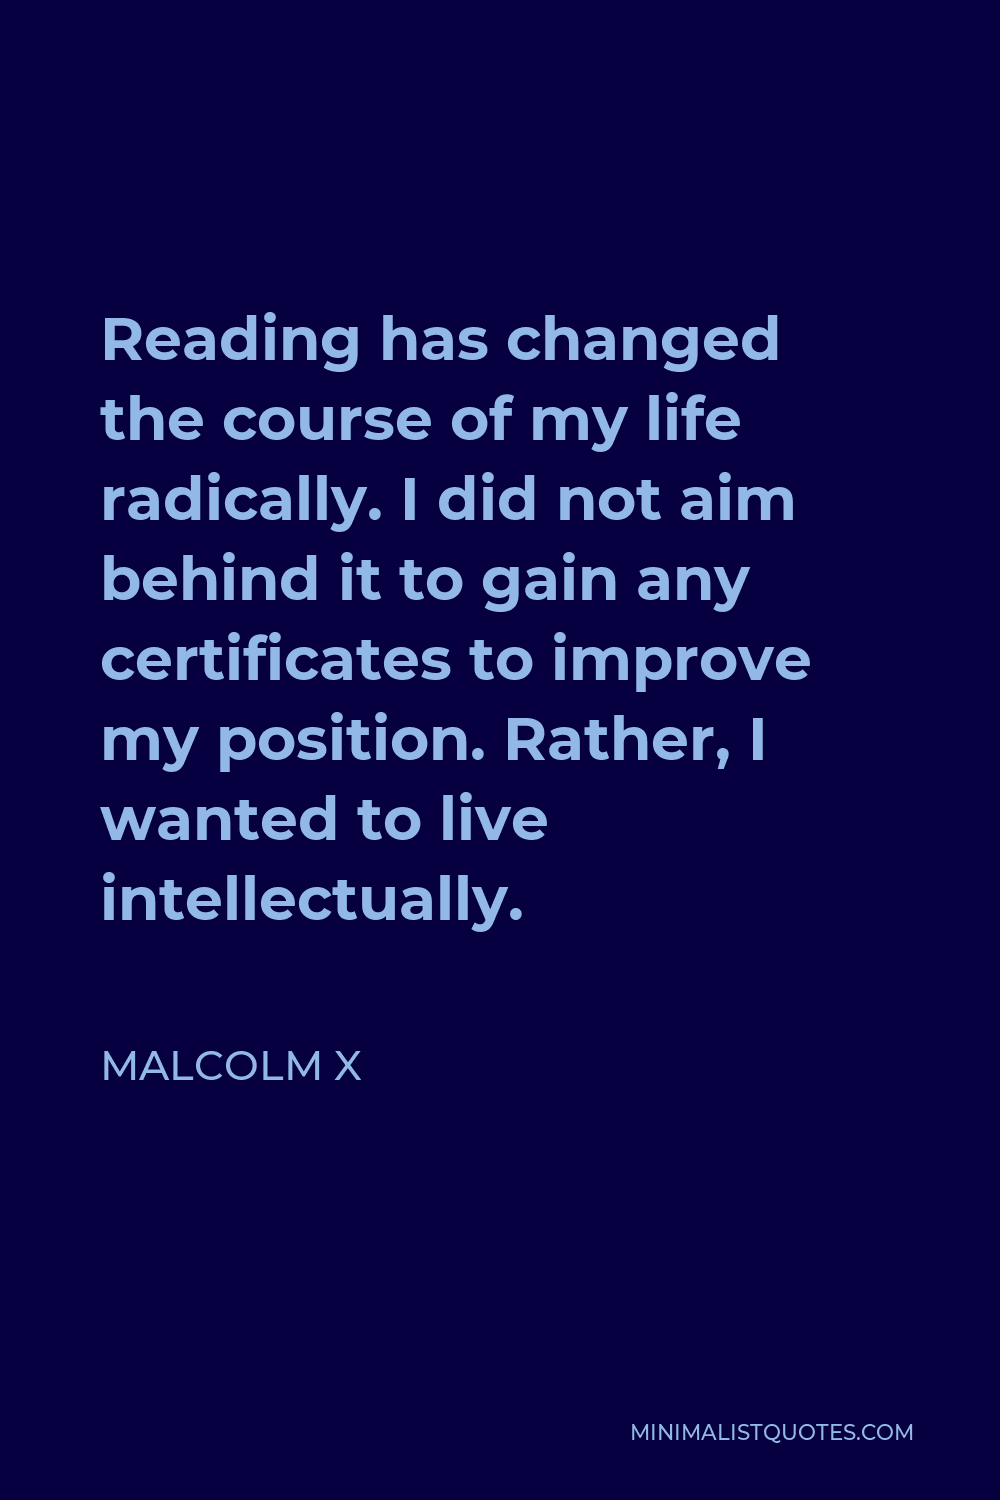 Malcolm X Quote - Reading has changed the course of my life radically. I did not aim behind it to gain any certificates to improve my position. Rather, I wanted to live intellectually.